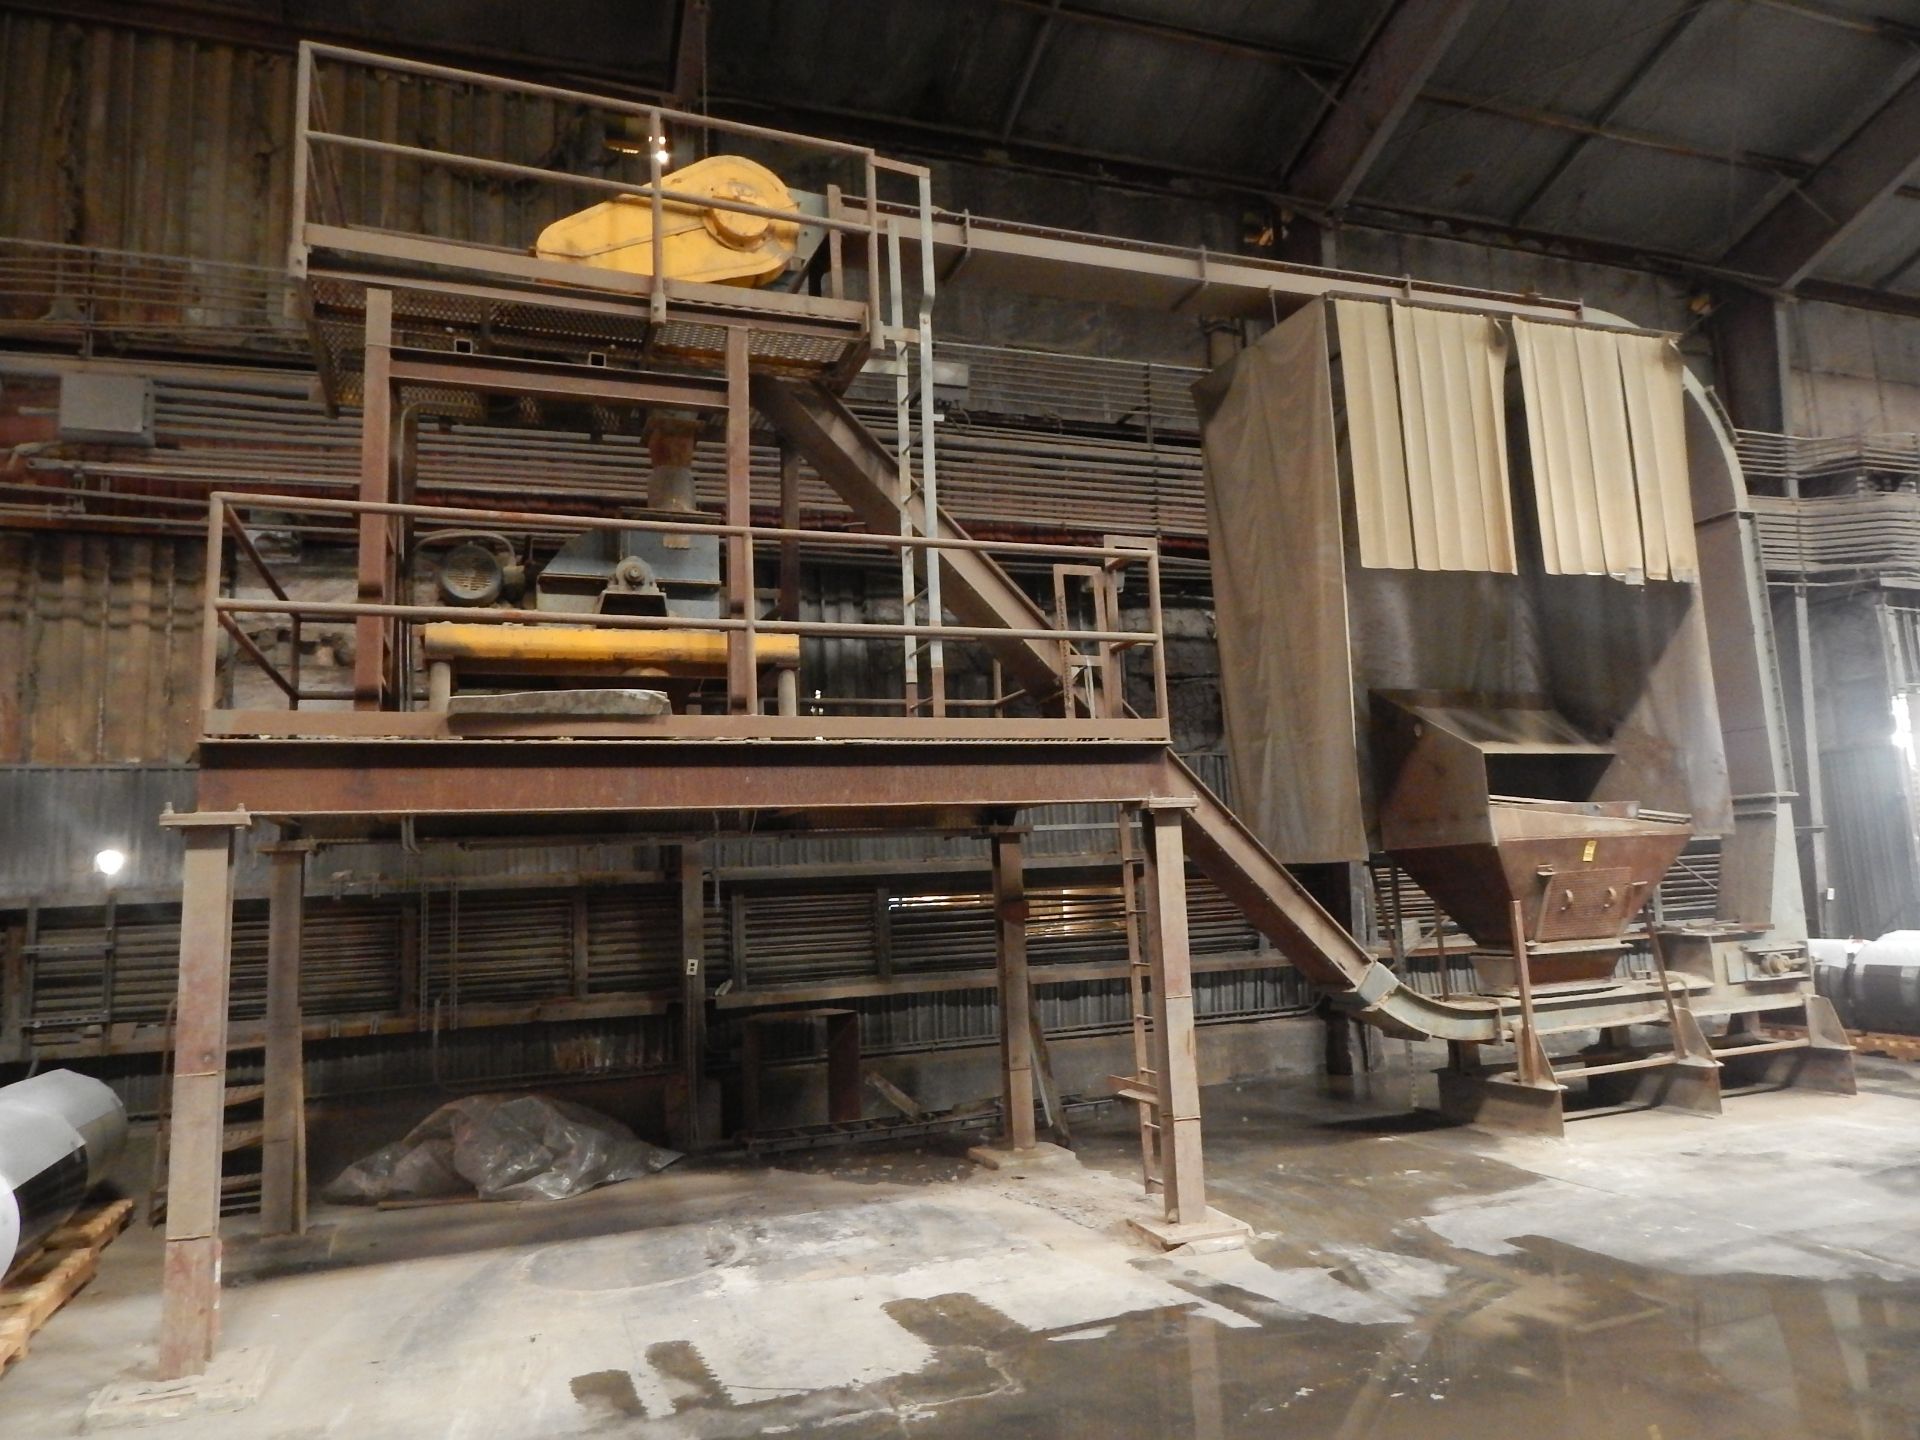 Zinc Crushing/Processing Line, with Gruendler Model #14 Hammer Mill and Stephens-Adamson Power - Image 2 of 14